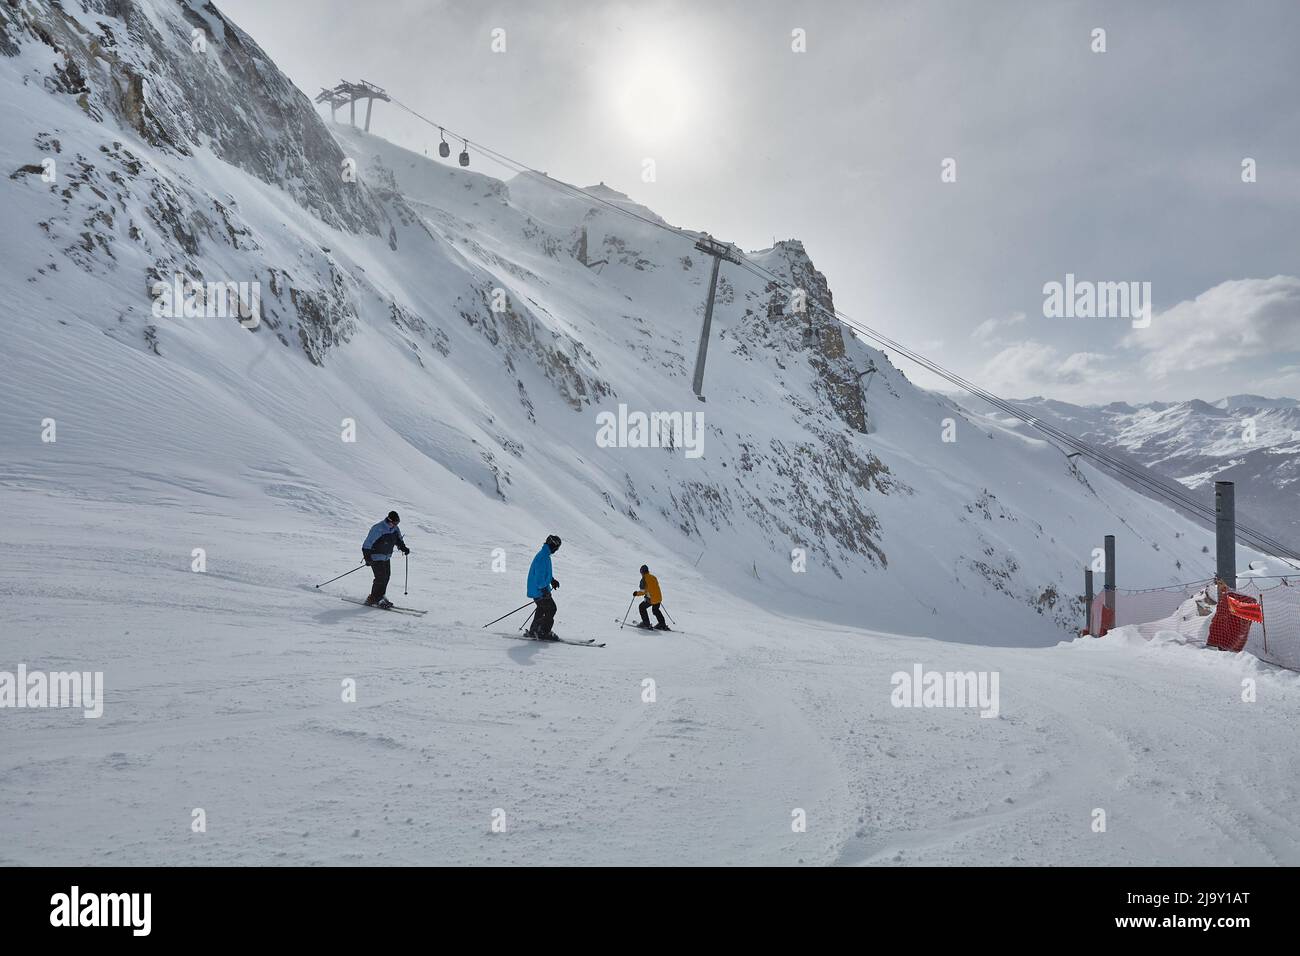 Skiing slopes with skiers Stock Photo